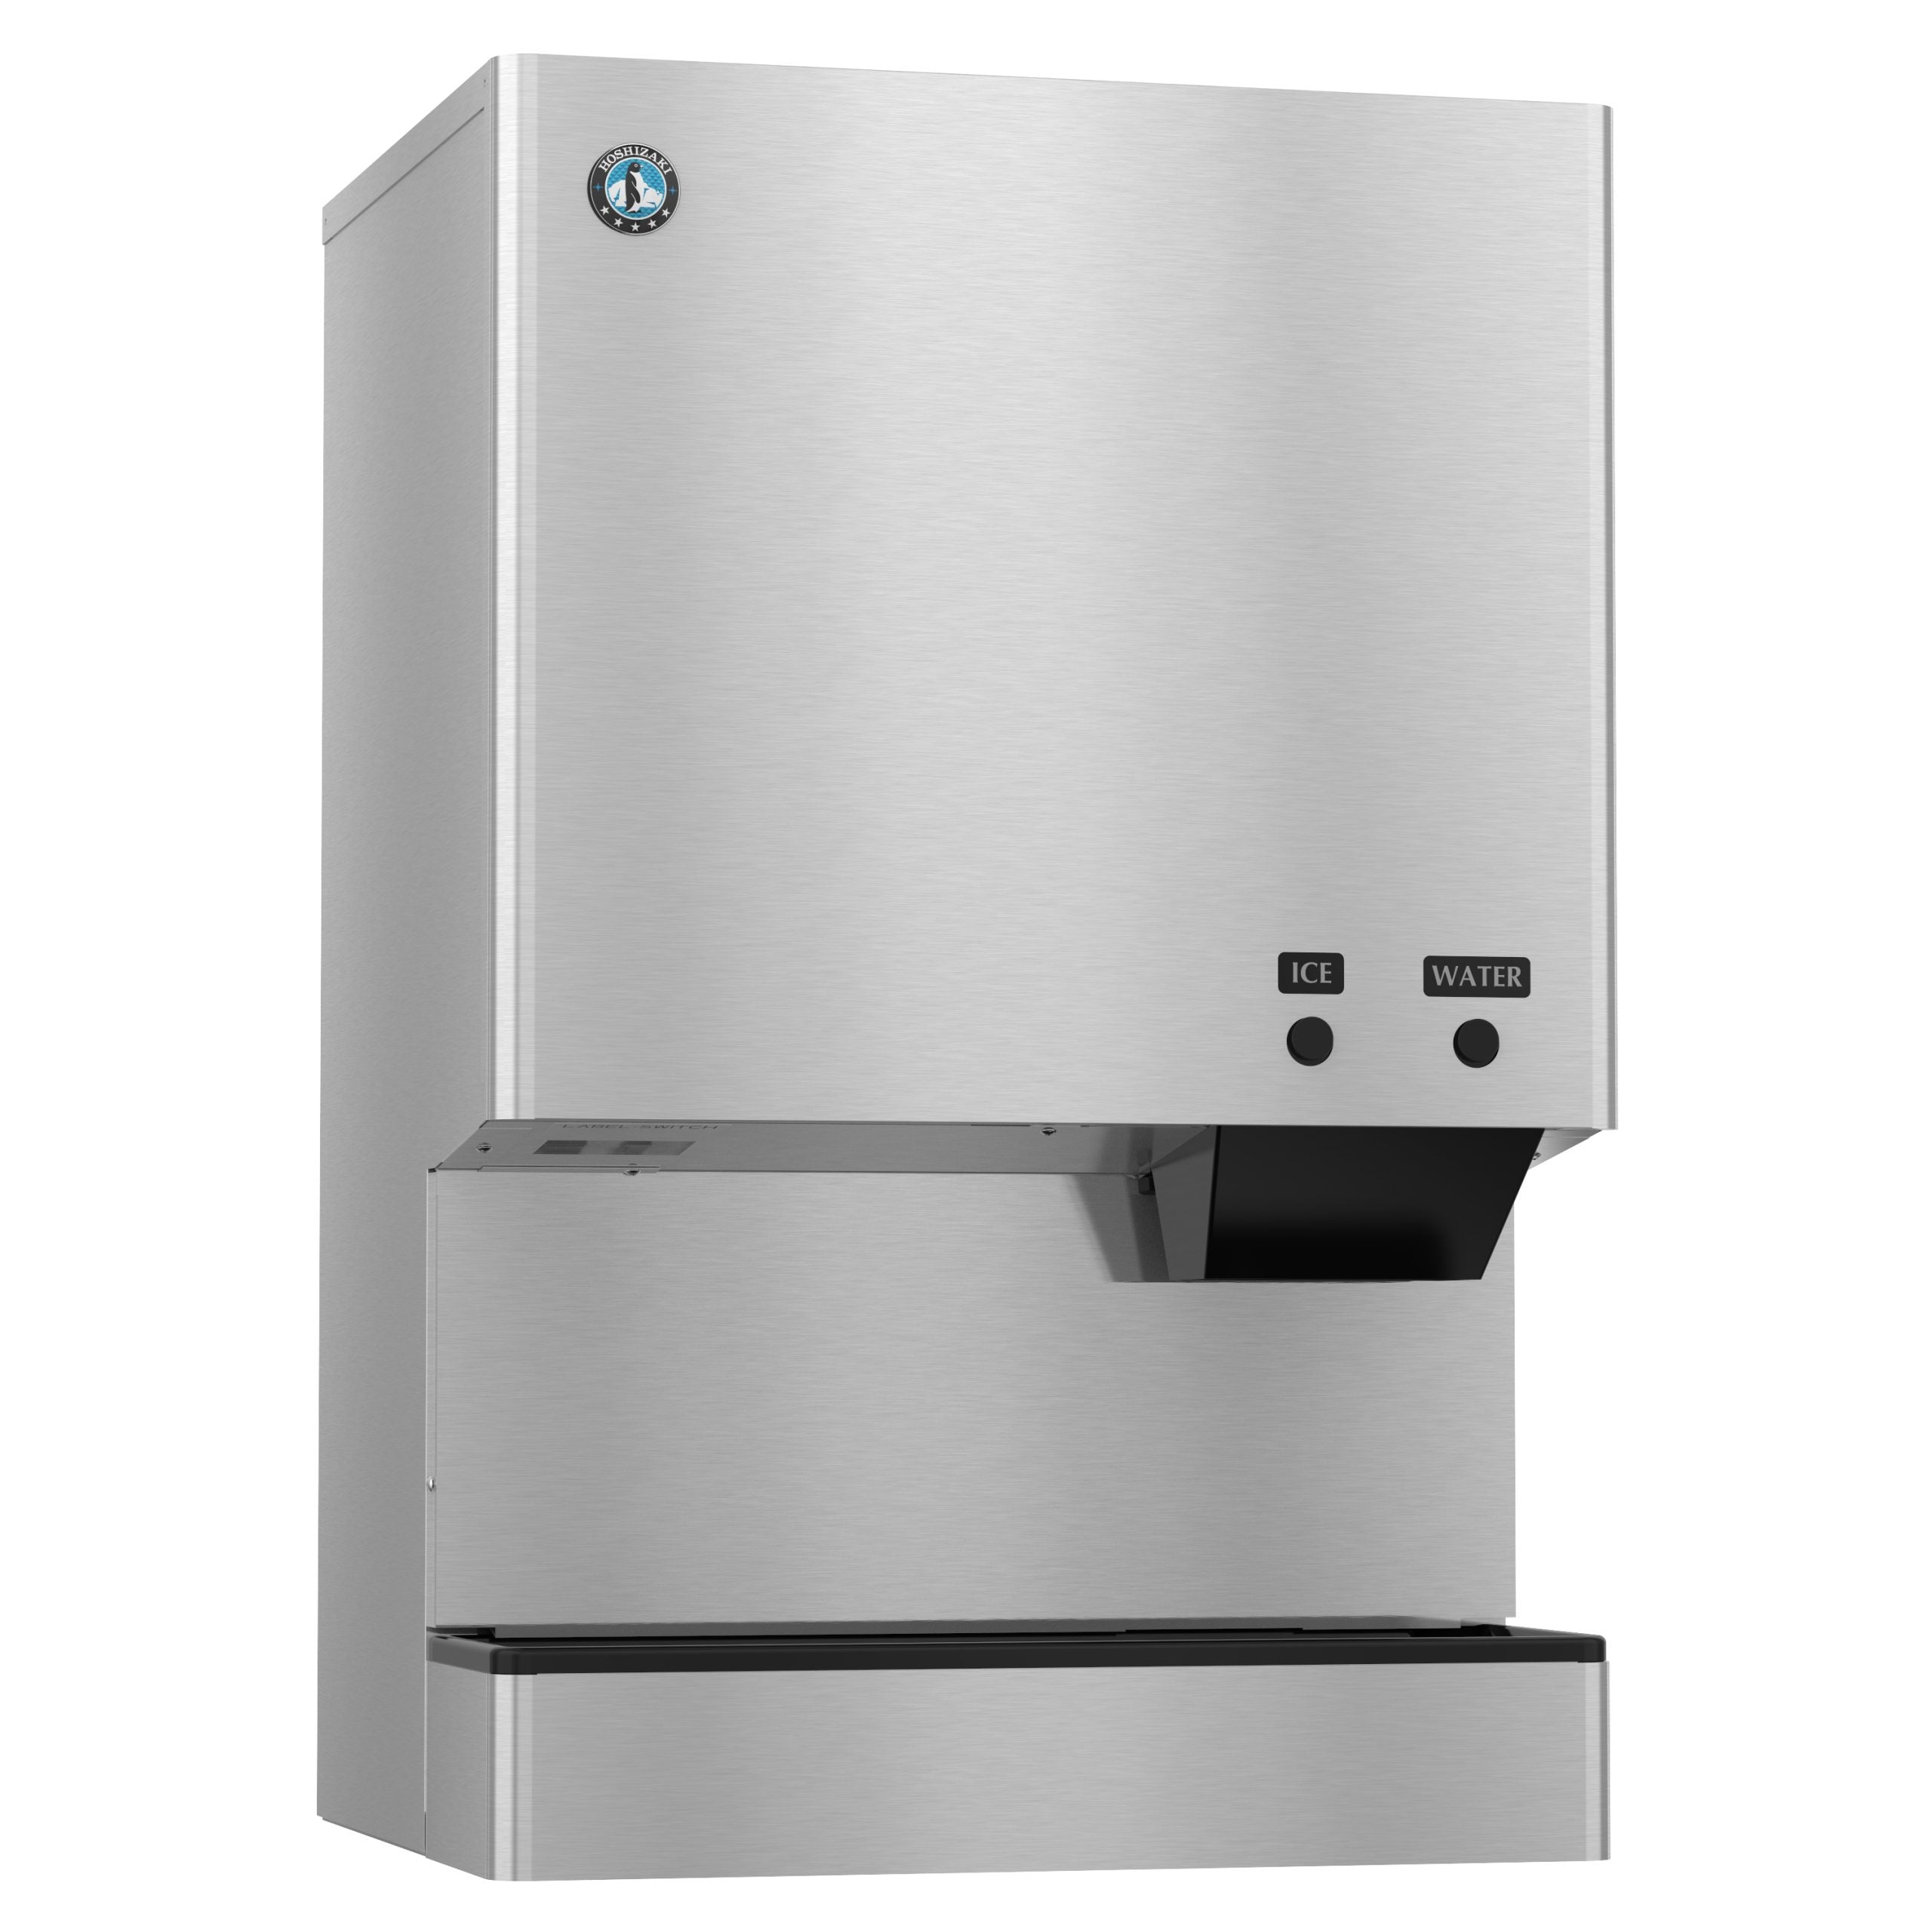 Hoshizaki DCM-500BWH | 26" Wide Water-Cooled Small Cubelet Ice & Water Dispenser w/ Built-In Storage Bin